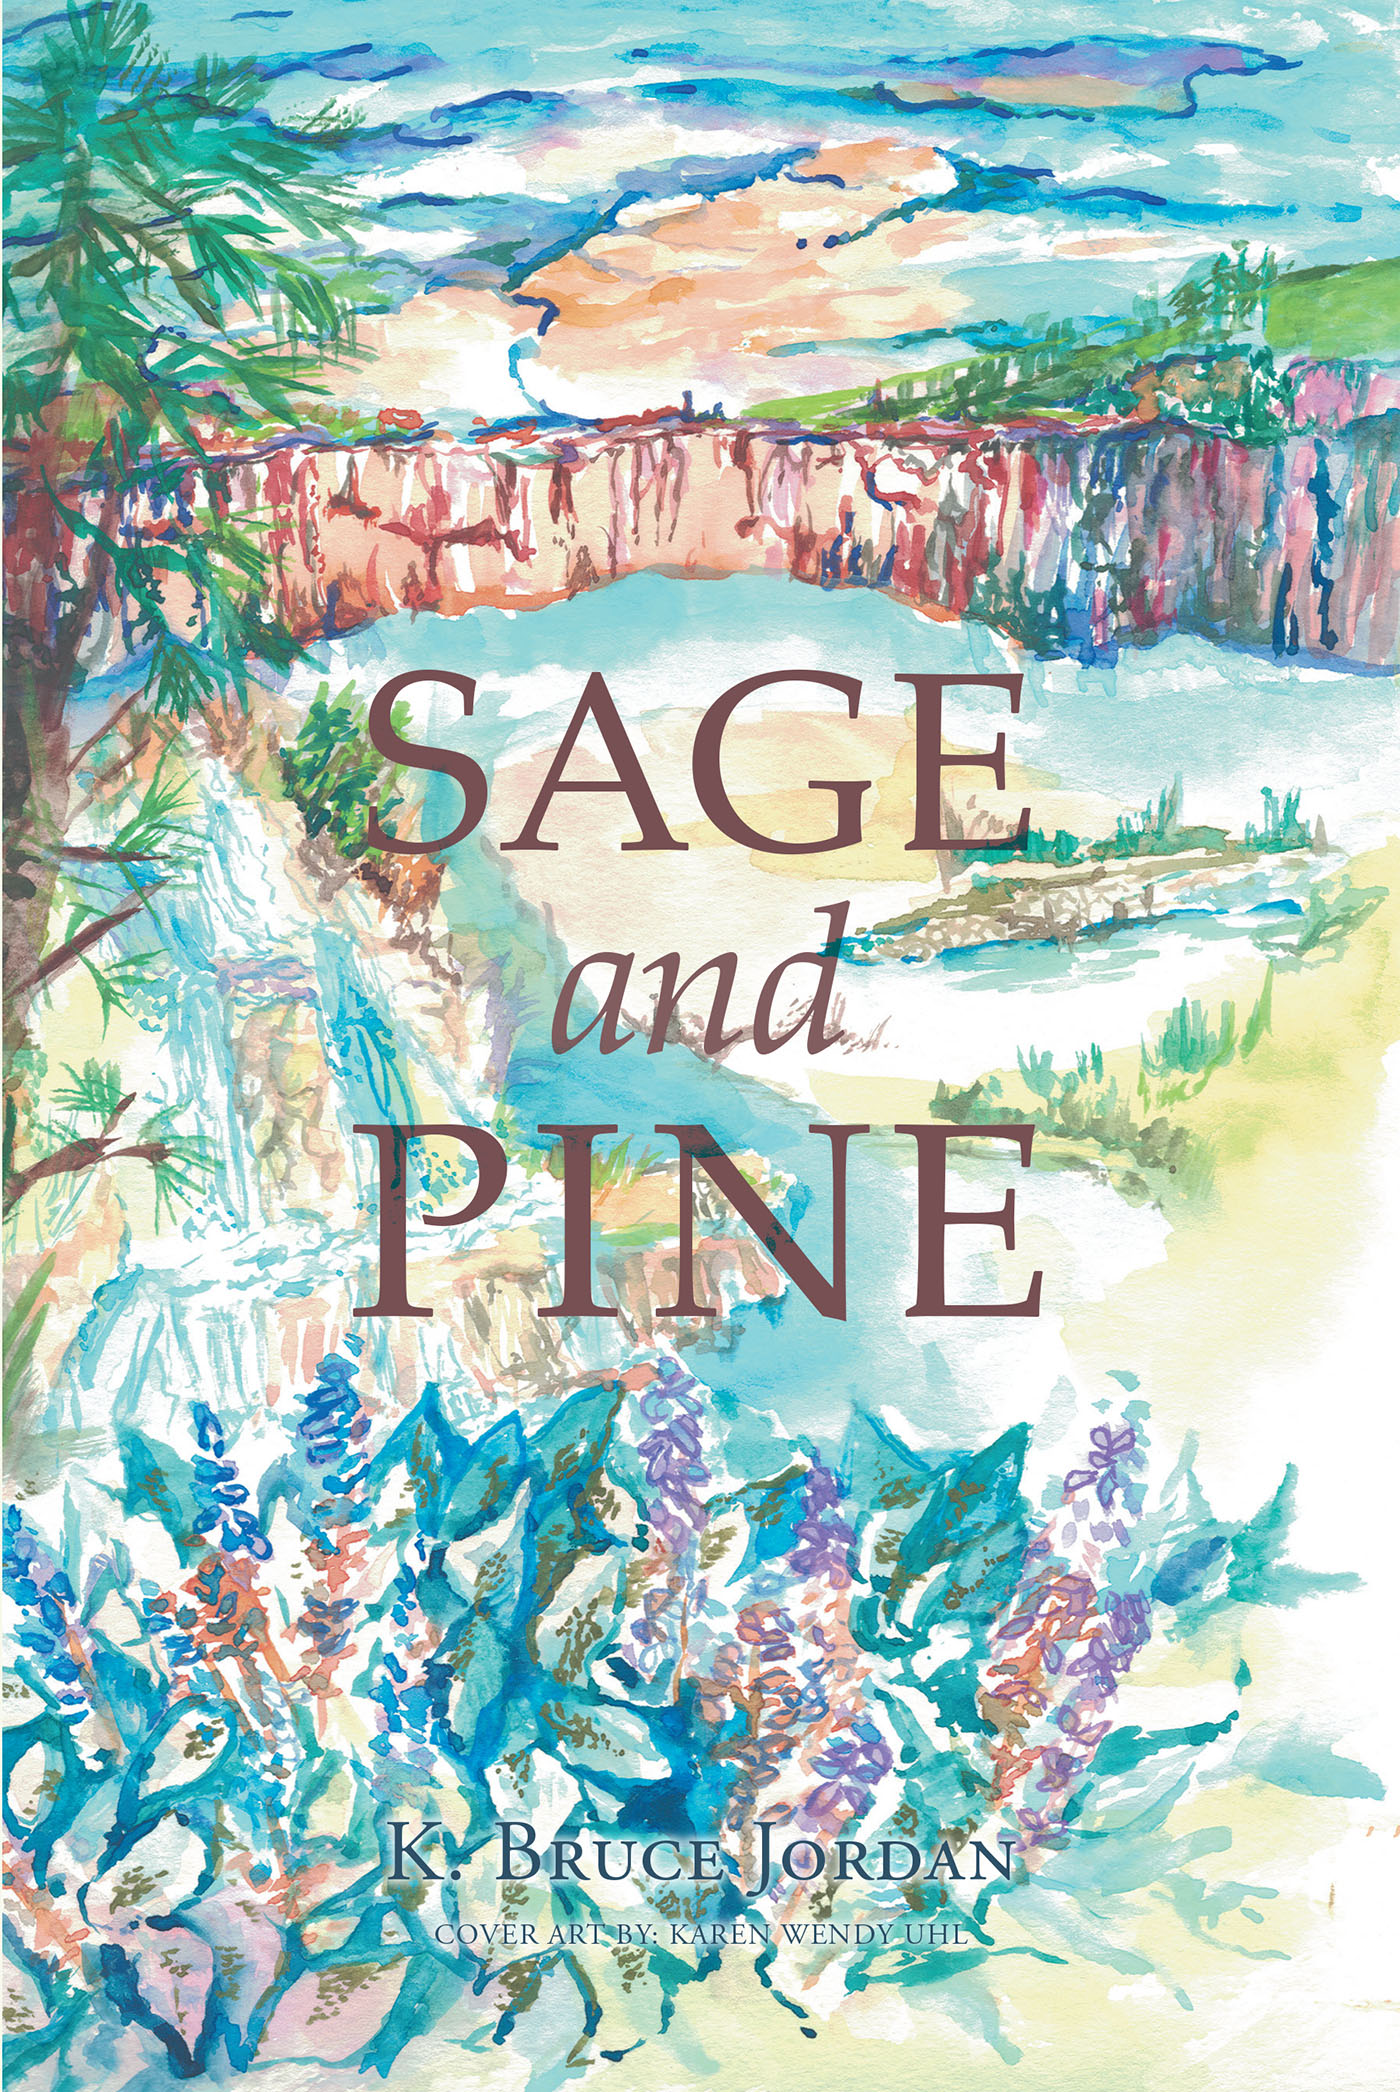 Author K. Bruce Jordan’s New Book, "Sage and Pine," is a Compelling Series of Poems & Other Writings That Share the Depths of the Author's Soul & His Past Experiences